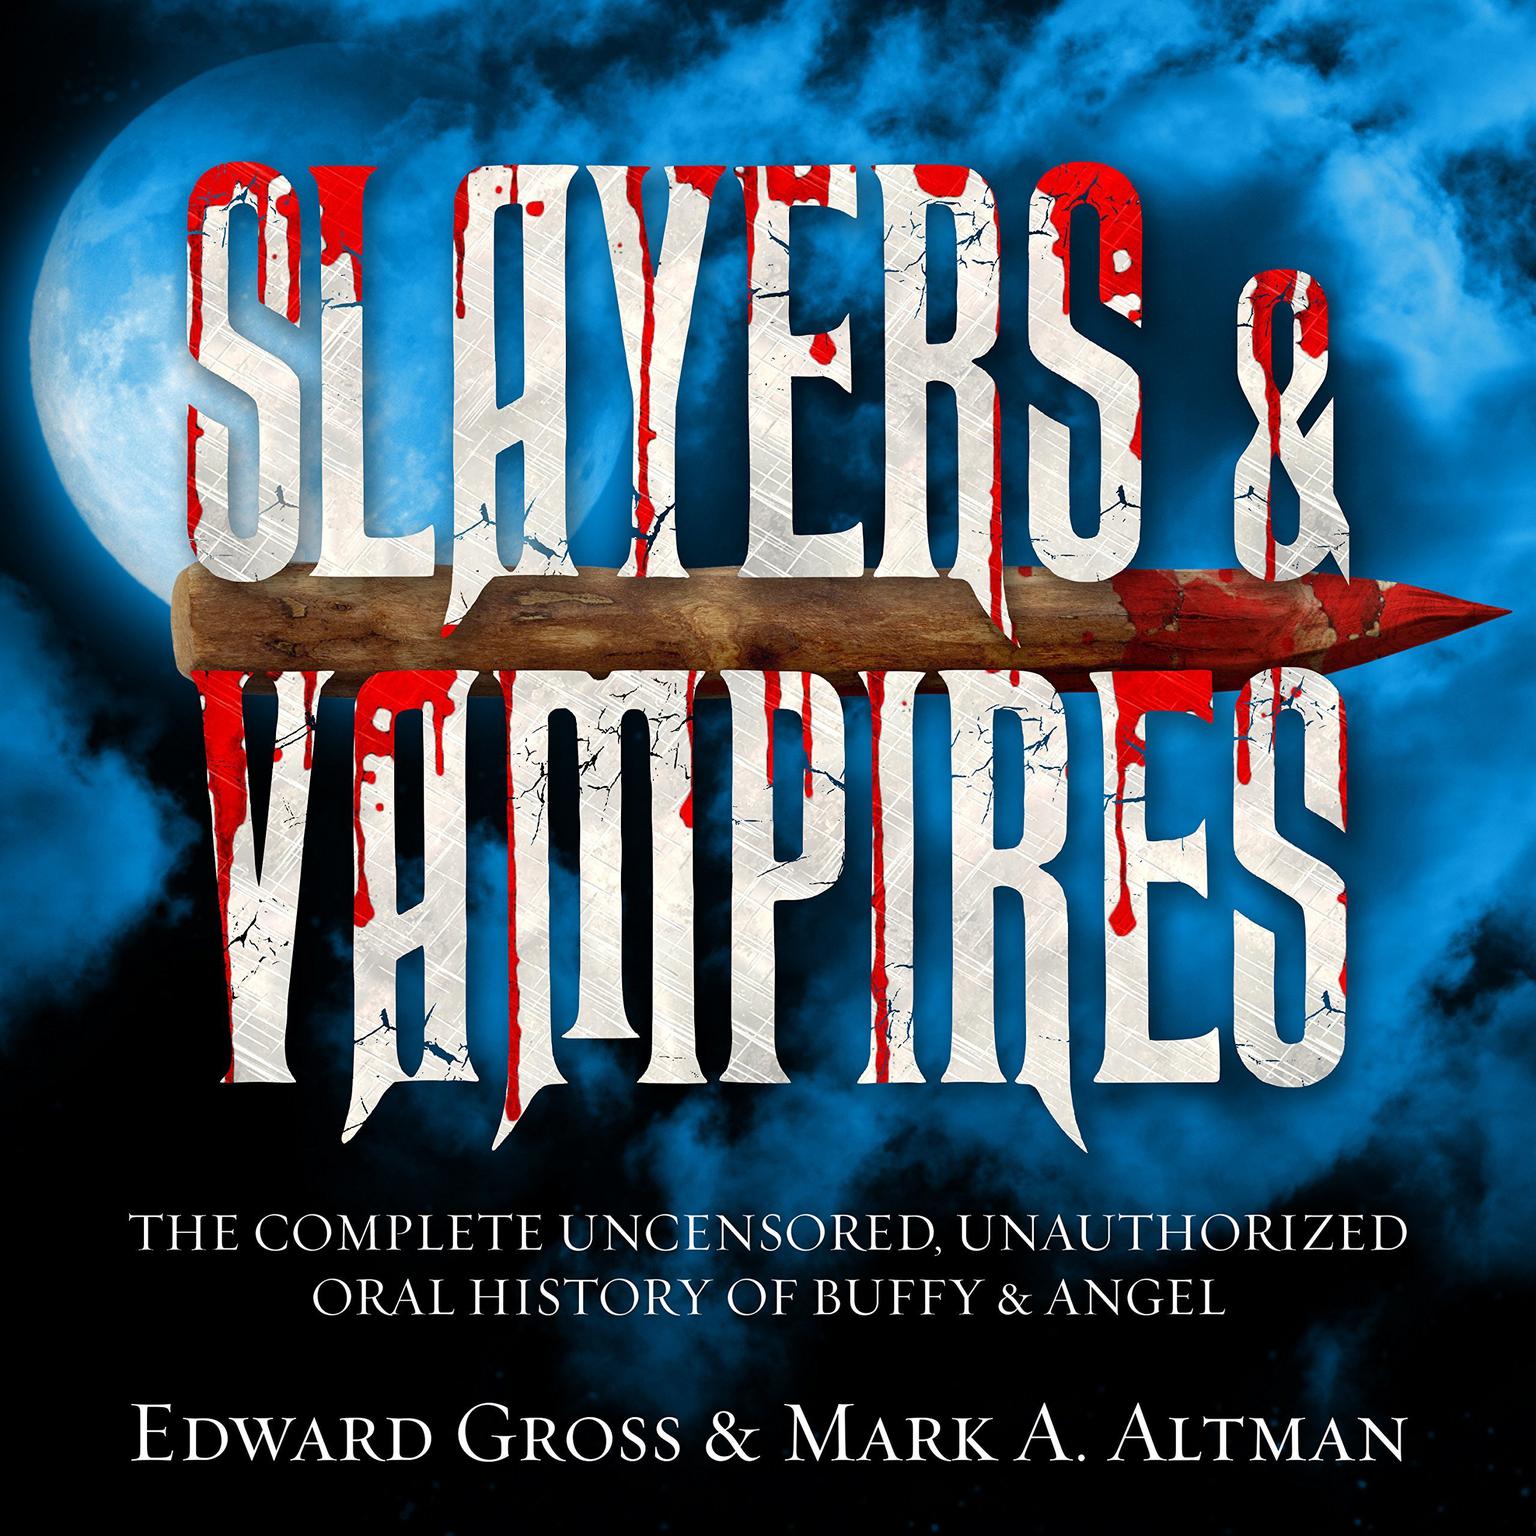 Slayers & Vampires: The Complete Uncensored, Unauthorized Oral History of Buffy & Angel Audiobook, by Edward Gross